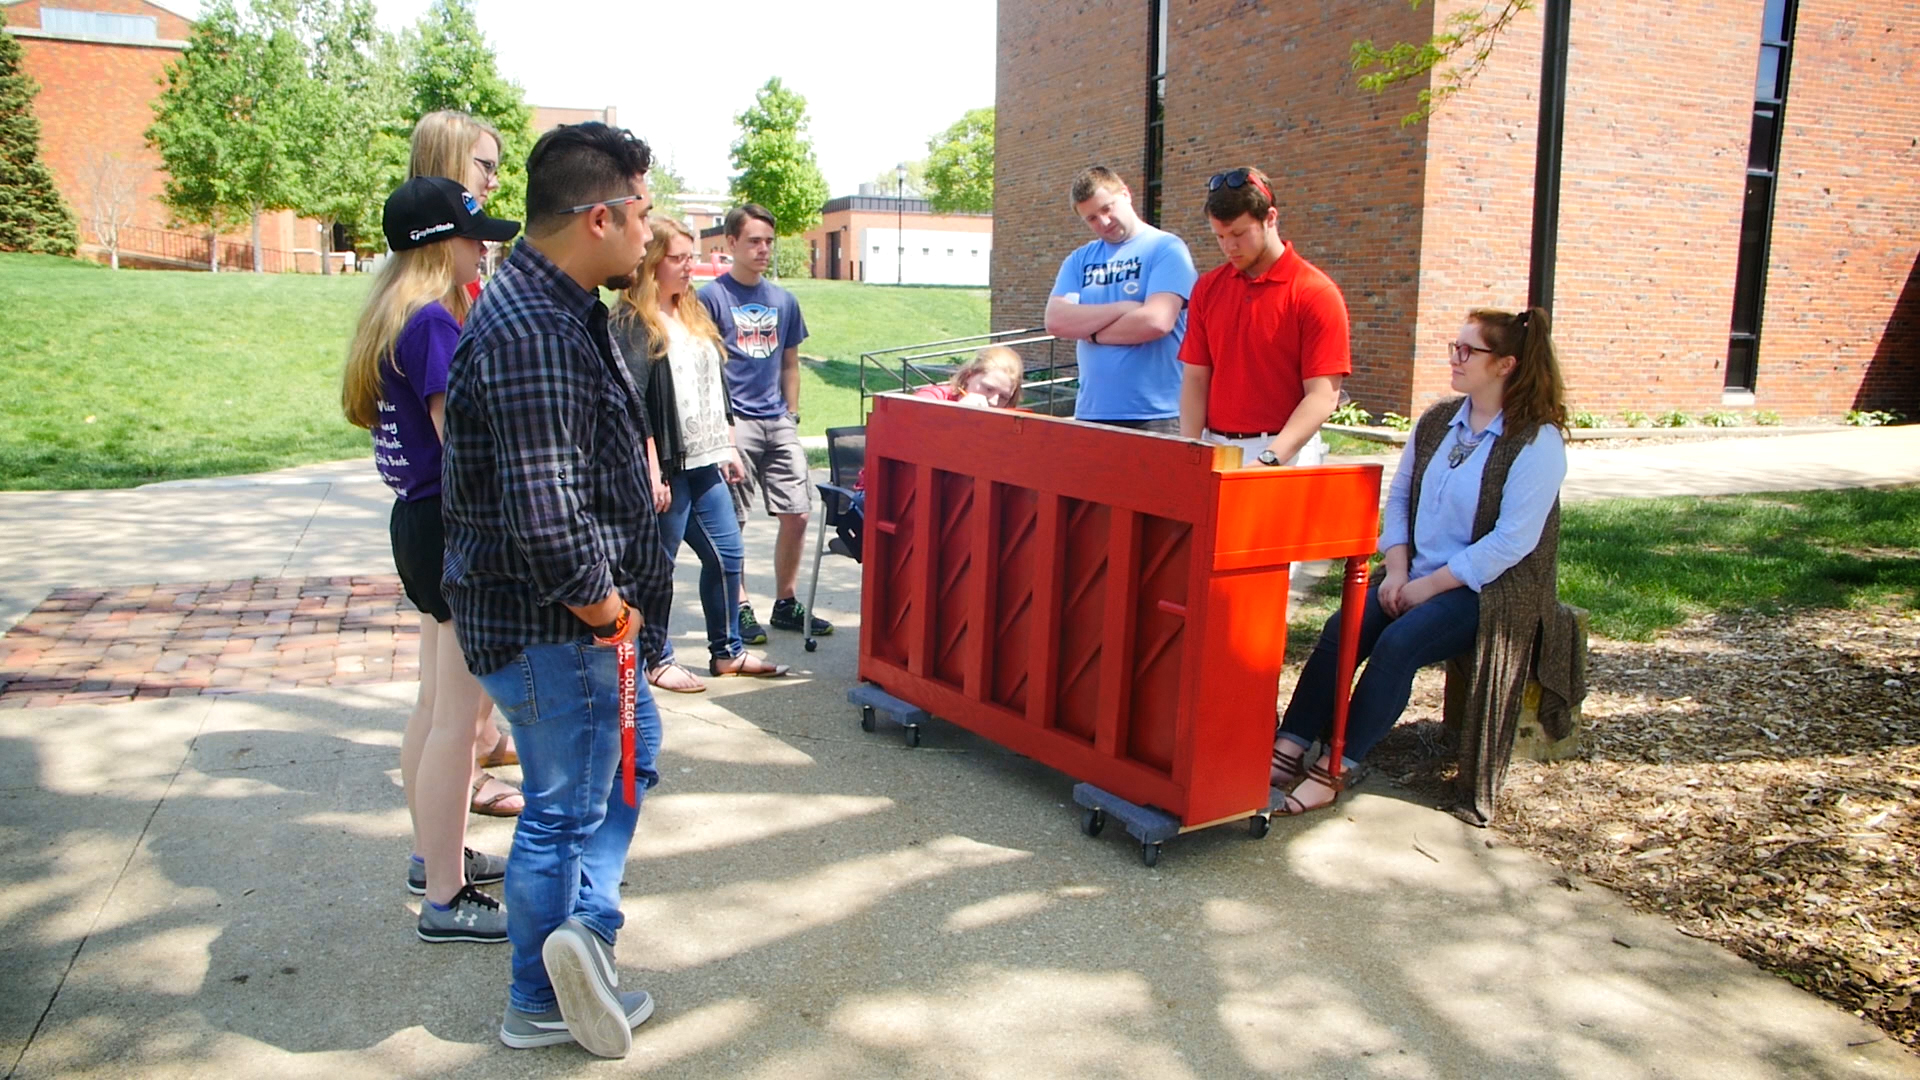 Street Piano Adds Beauty and Music to Campus